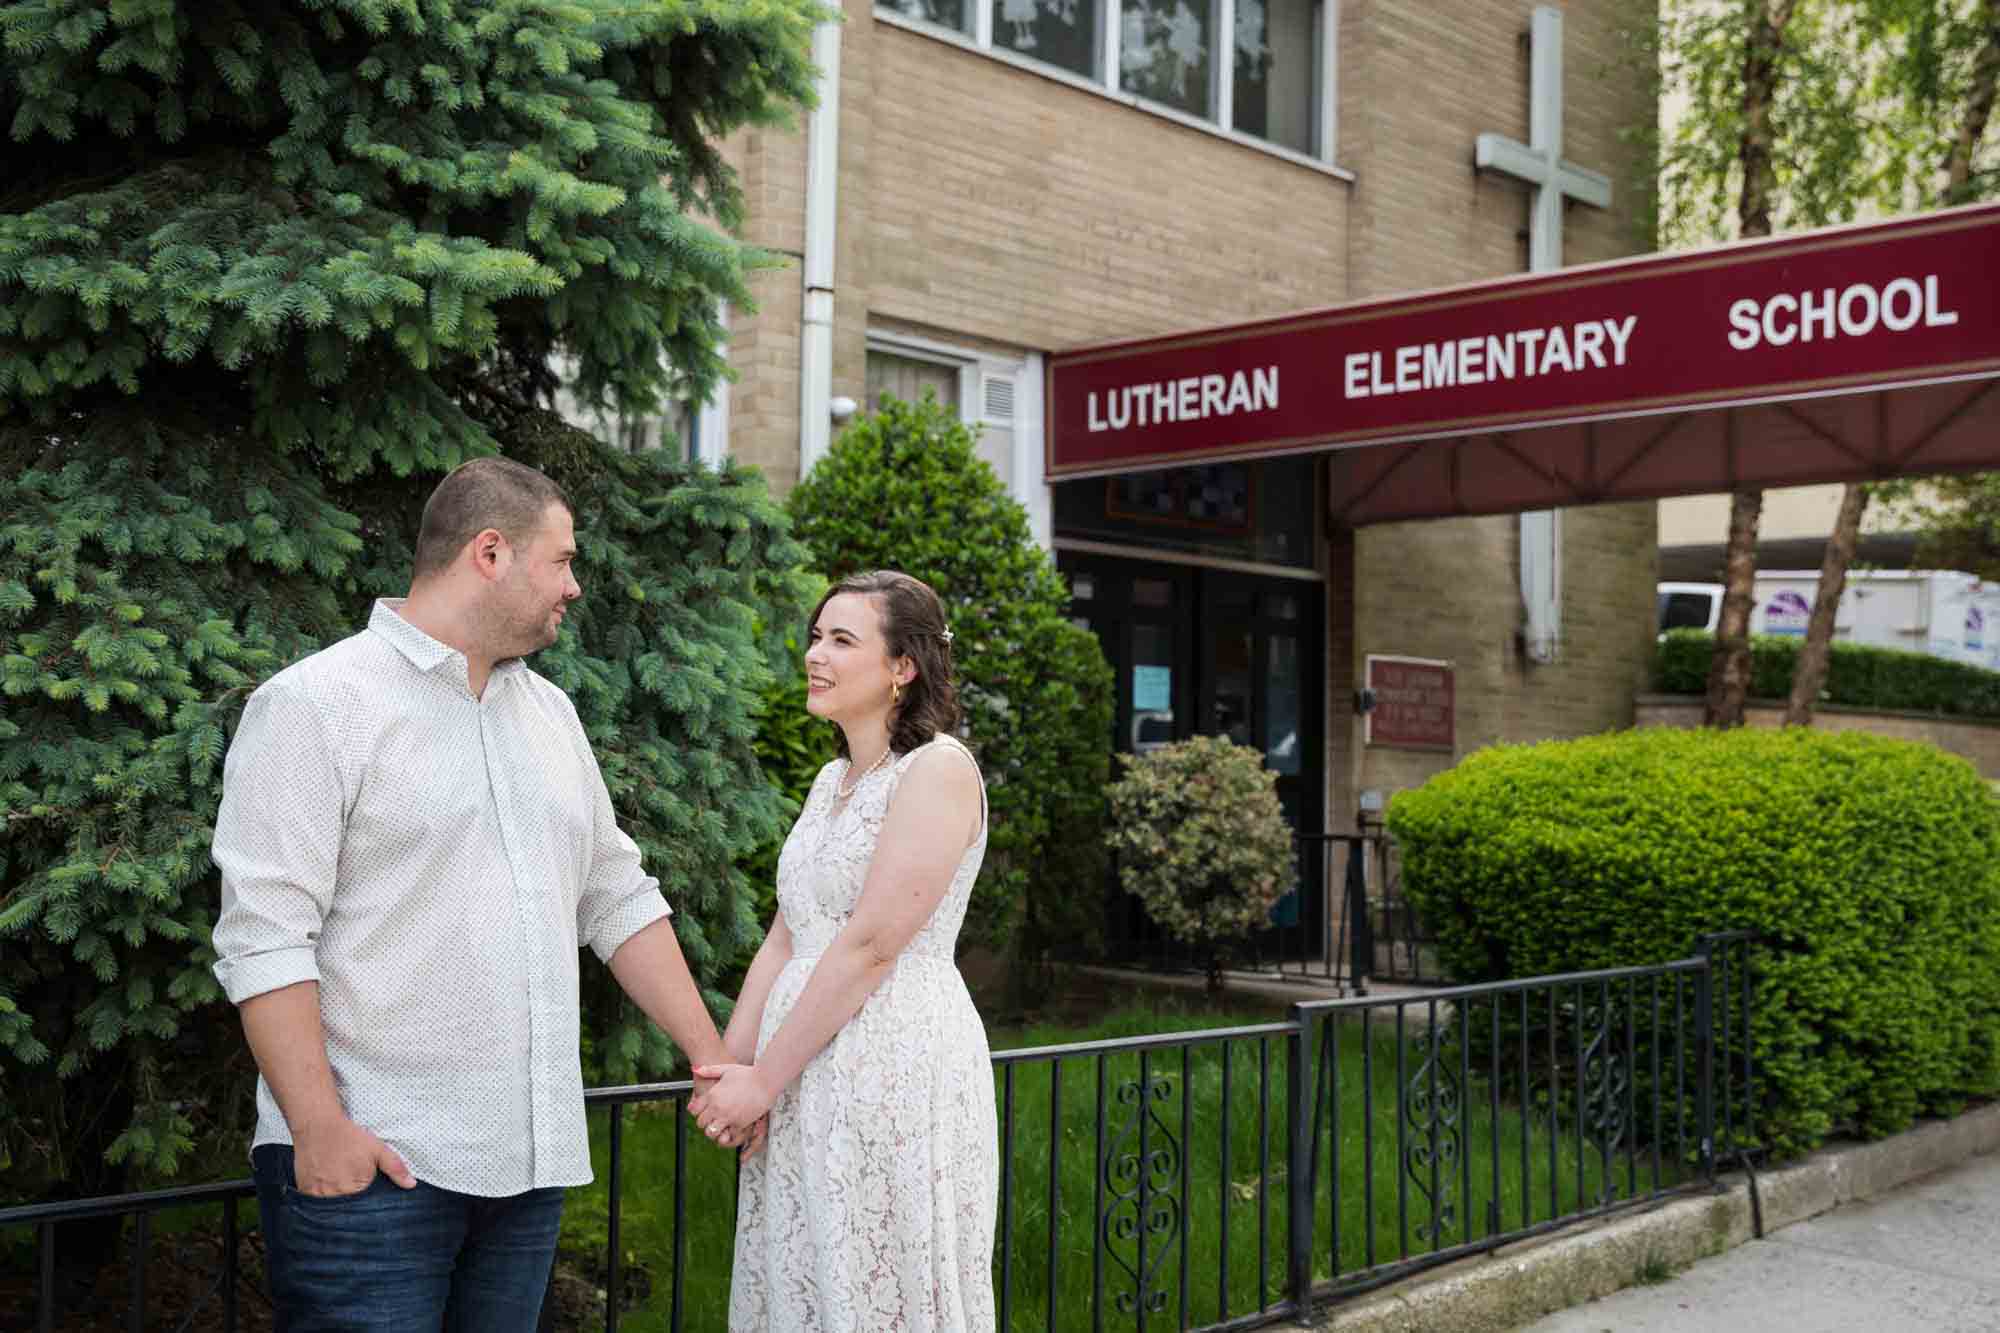 Couple holding hands in front of Lutheran Elementary School for an article on how to recreate your love story in your engagement shoot